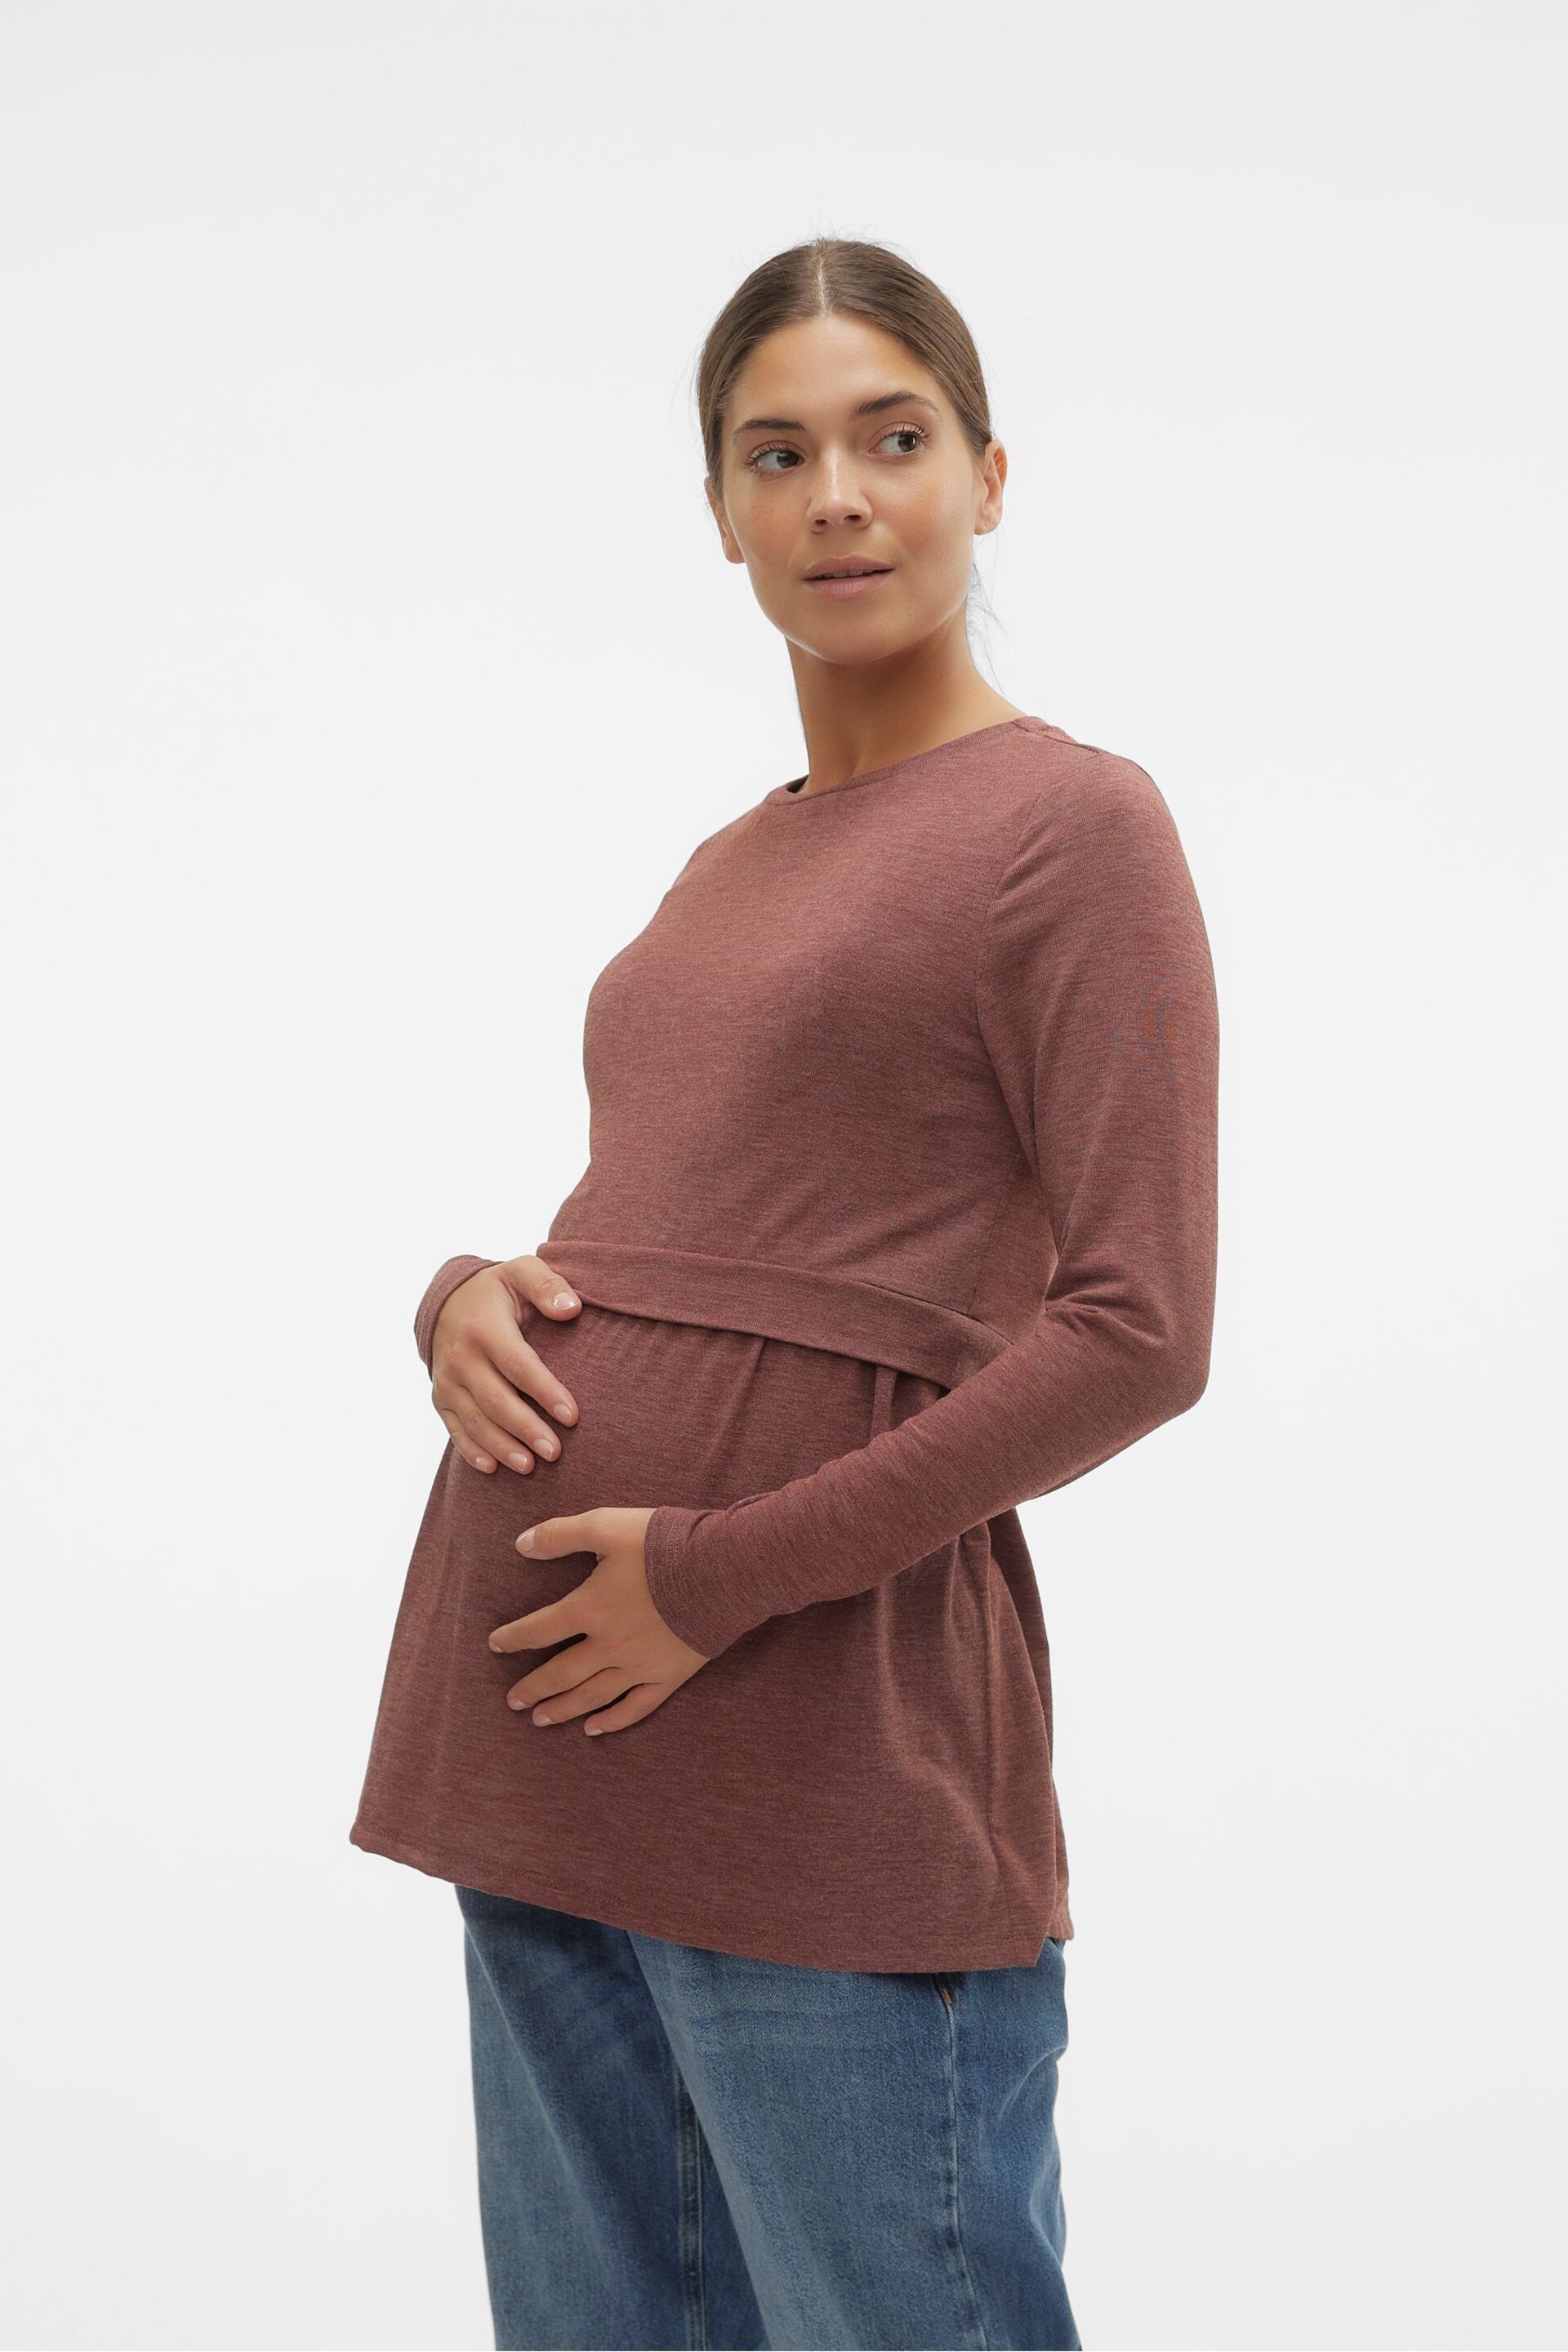 Mamalicious Brown Maternity 2 In 1 Nursing Super Soft Knitted Top - Image 1 of 5